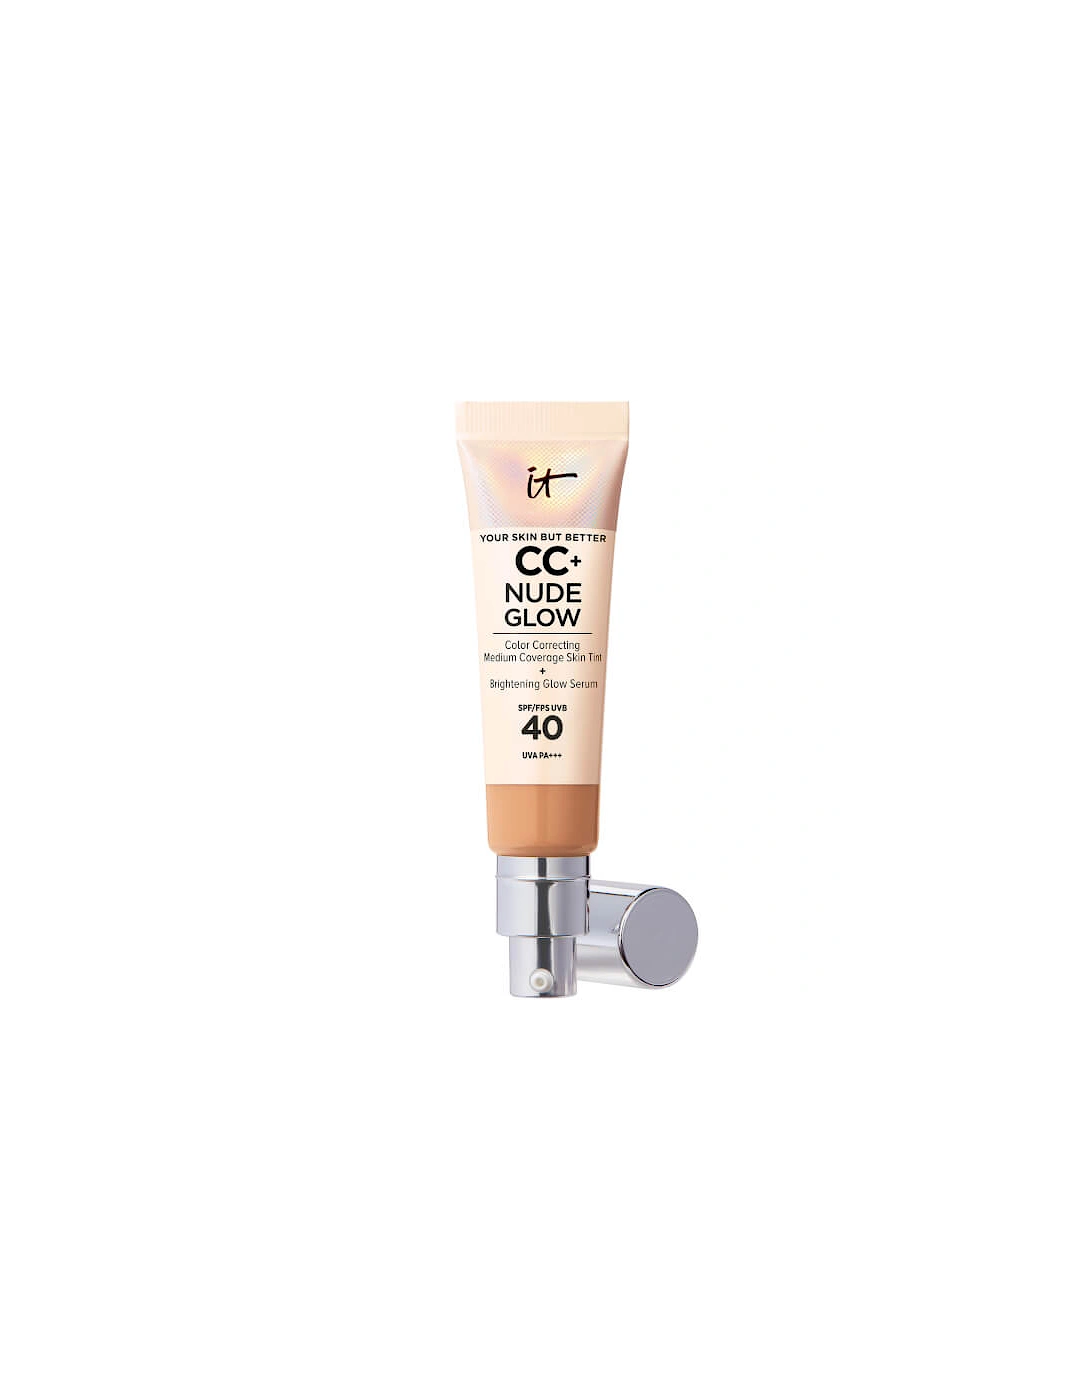 CC+ and Nude Glow Lightweight Foundation and Glow Serum with SPF40 - Neutral Tan, 2 of 1